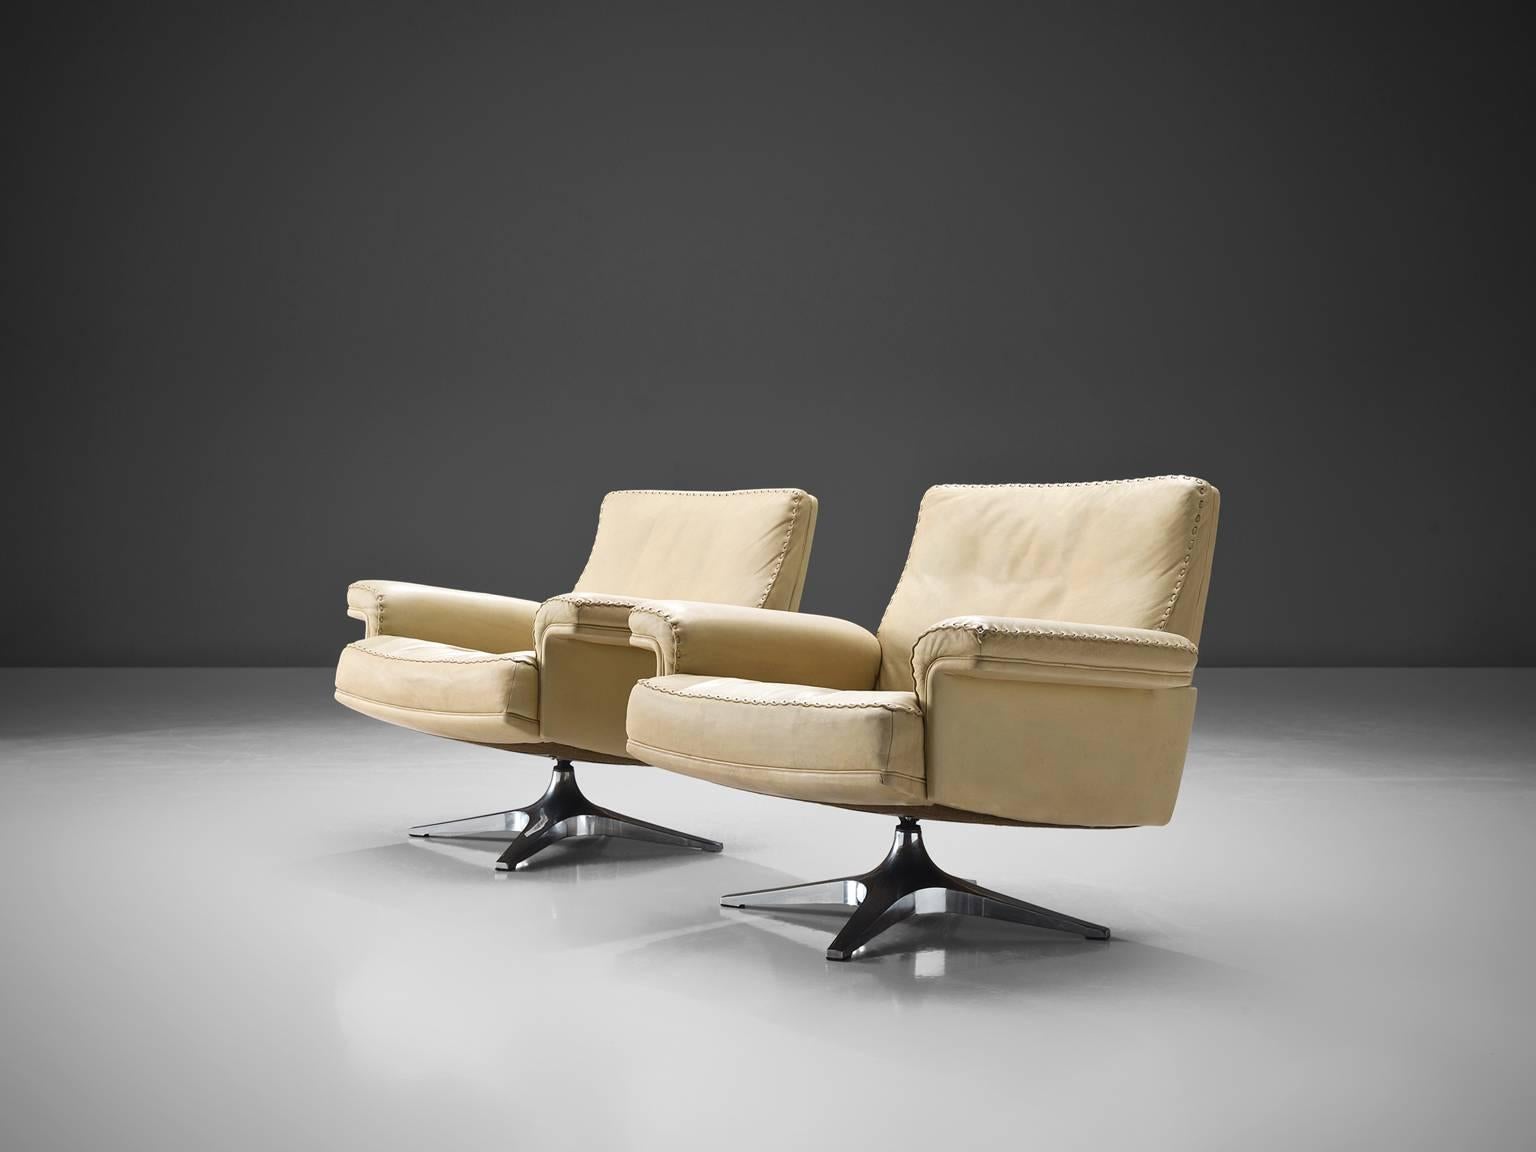 De Sede, pair of DS 31 chairs, leather, steel, Switzerland, 1970s.

This is a set of two De Sede swivel chairs in off-white leather and steel. The seats are formed as comfortable shells with two wide armrests. The chairs lean slight backwards in